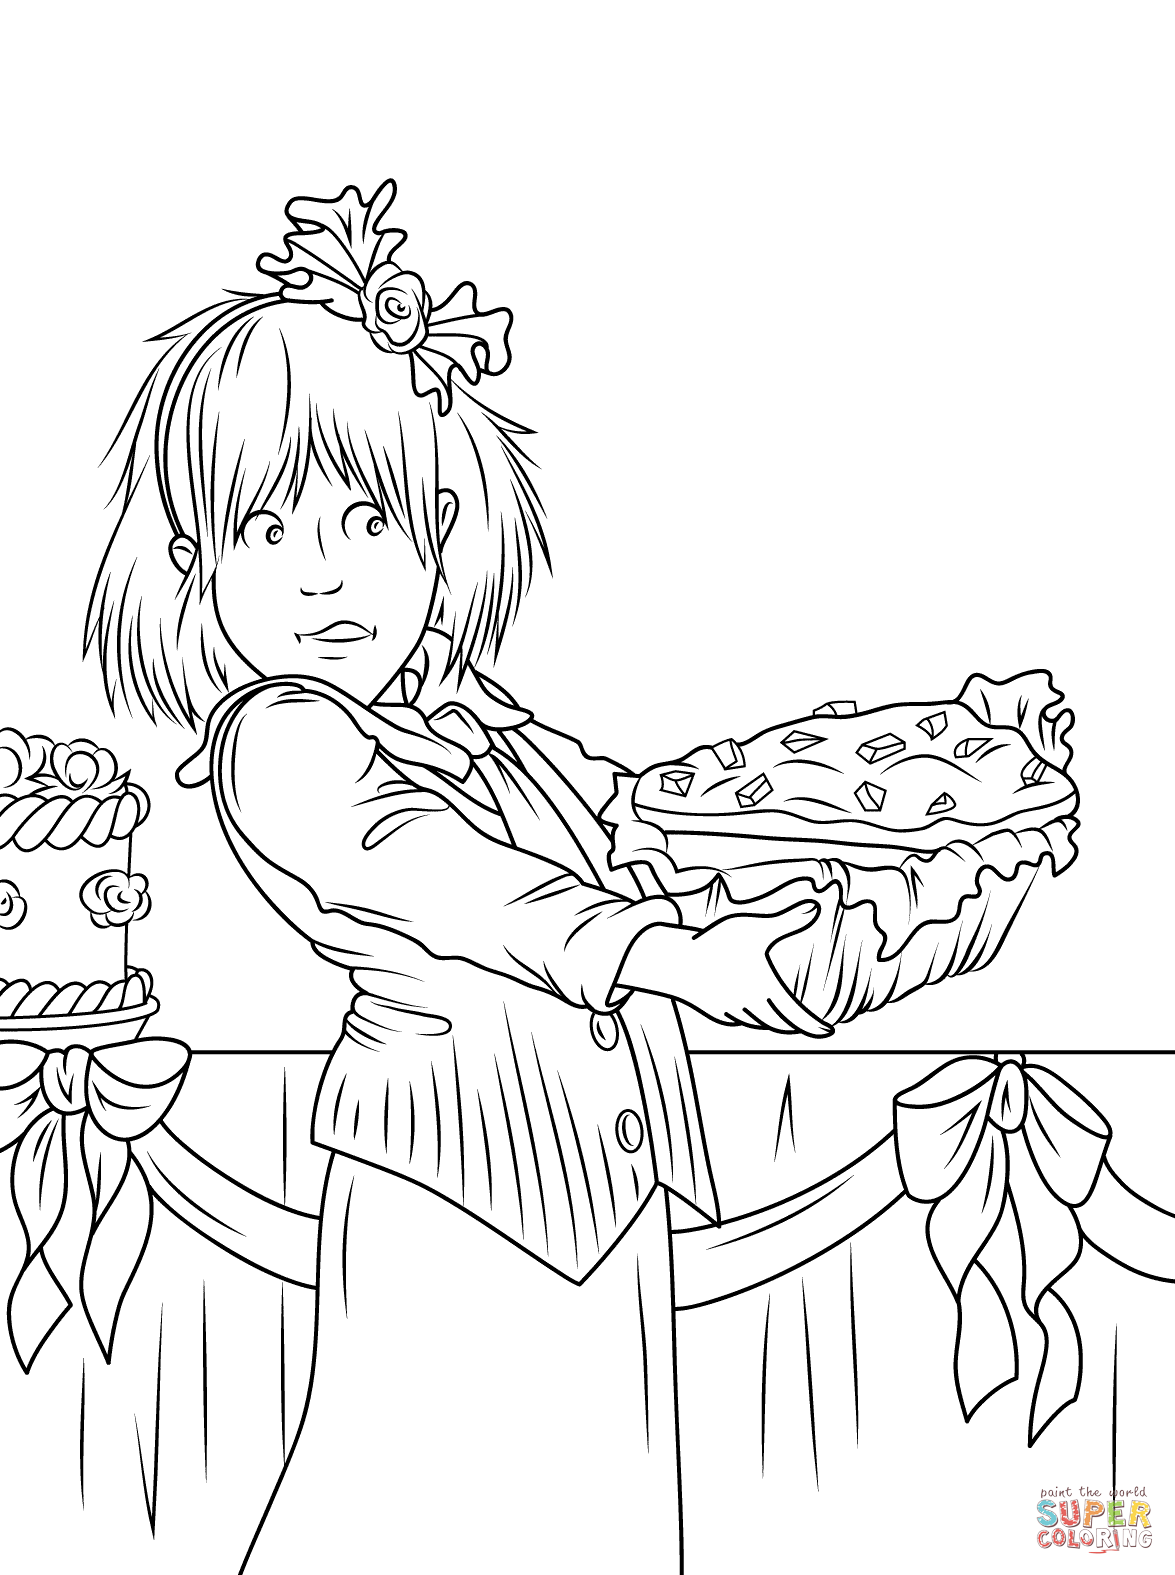 Junie b jones and the yucky blucky fruitcake coloring page free printable coloring pages